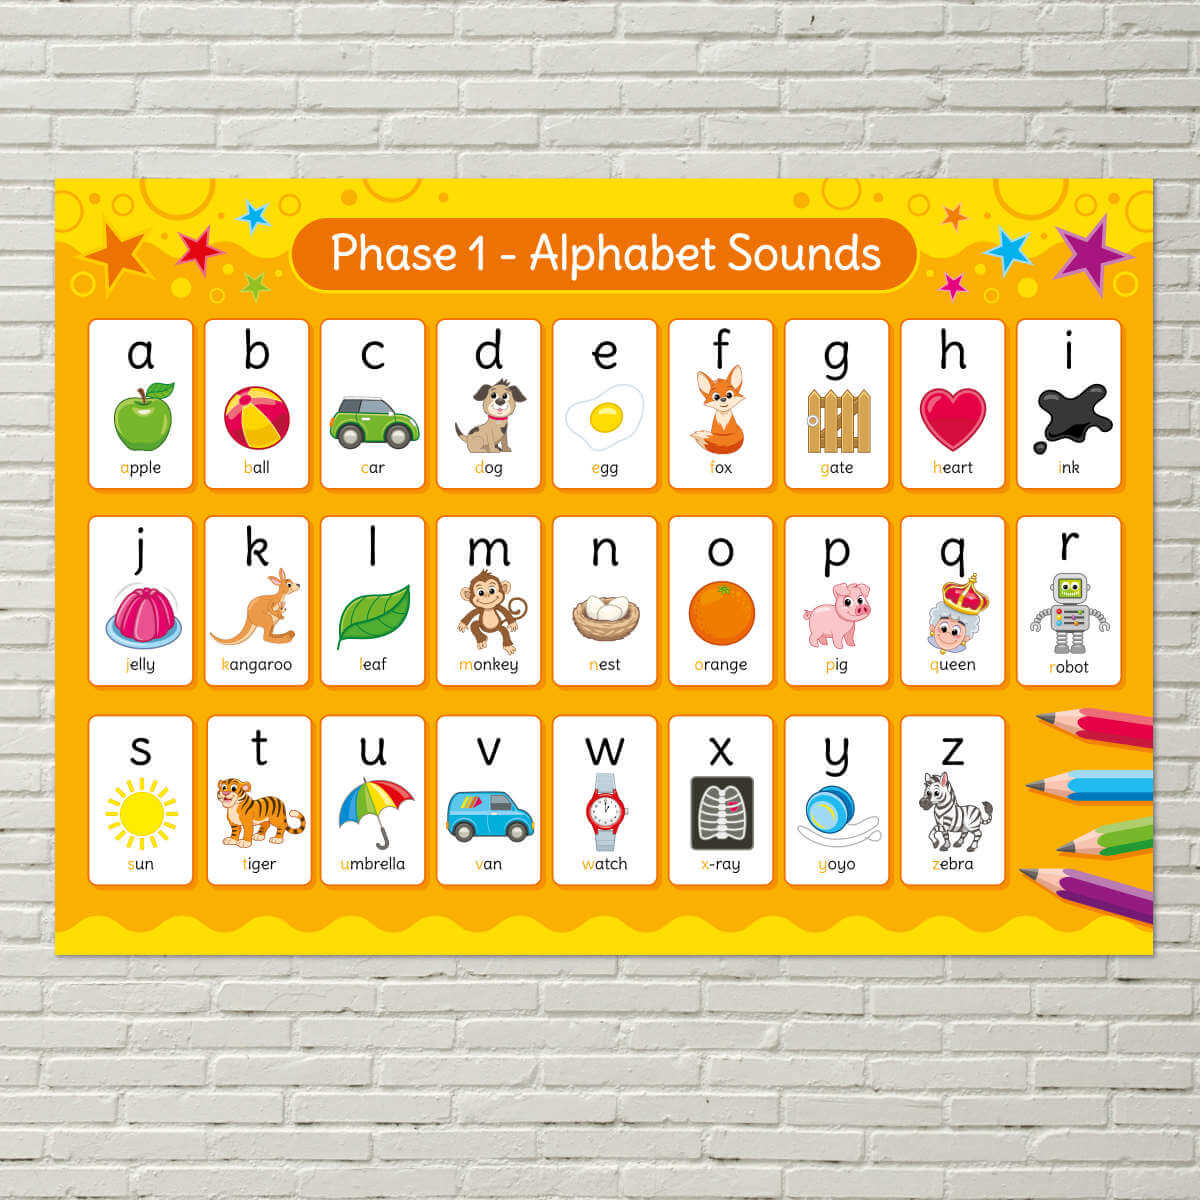 Phonics Phase 1 Alphabet Sounds Poster - English Poster for Schools